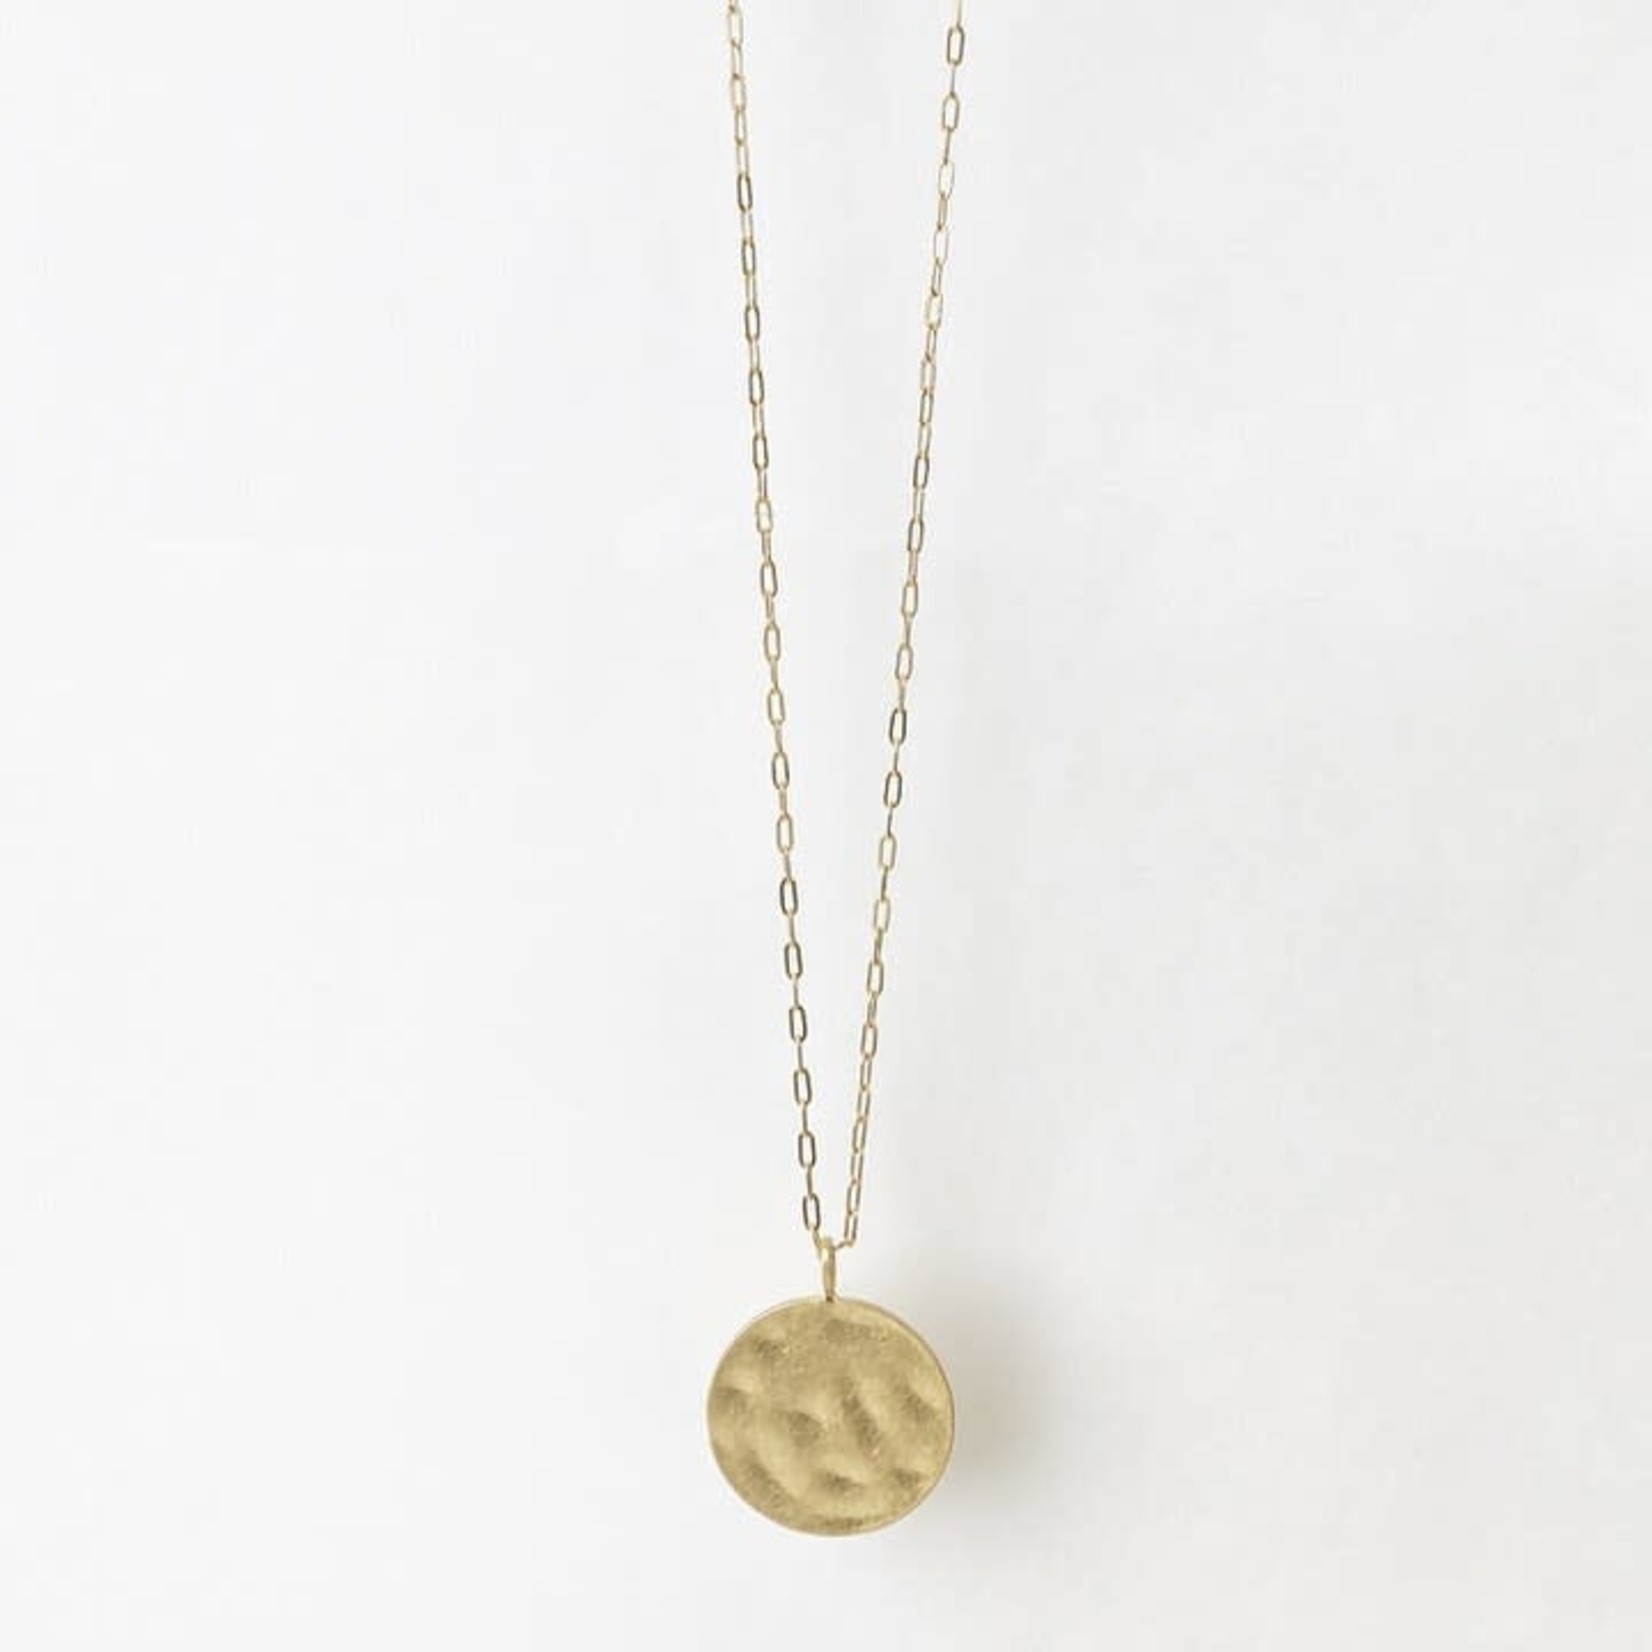 Gold Long Necklace with Hammered Metal Pendant